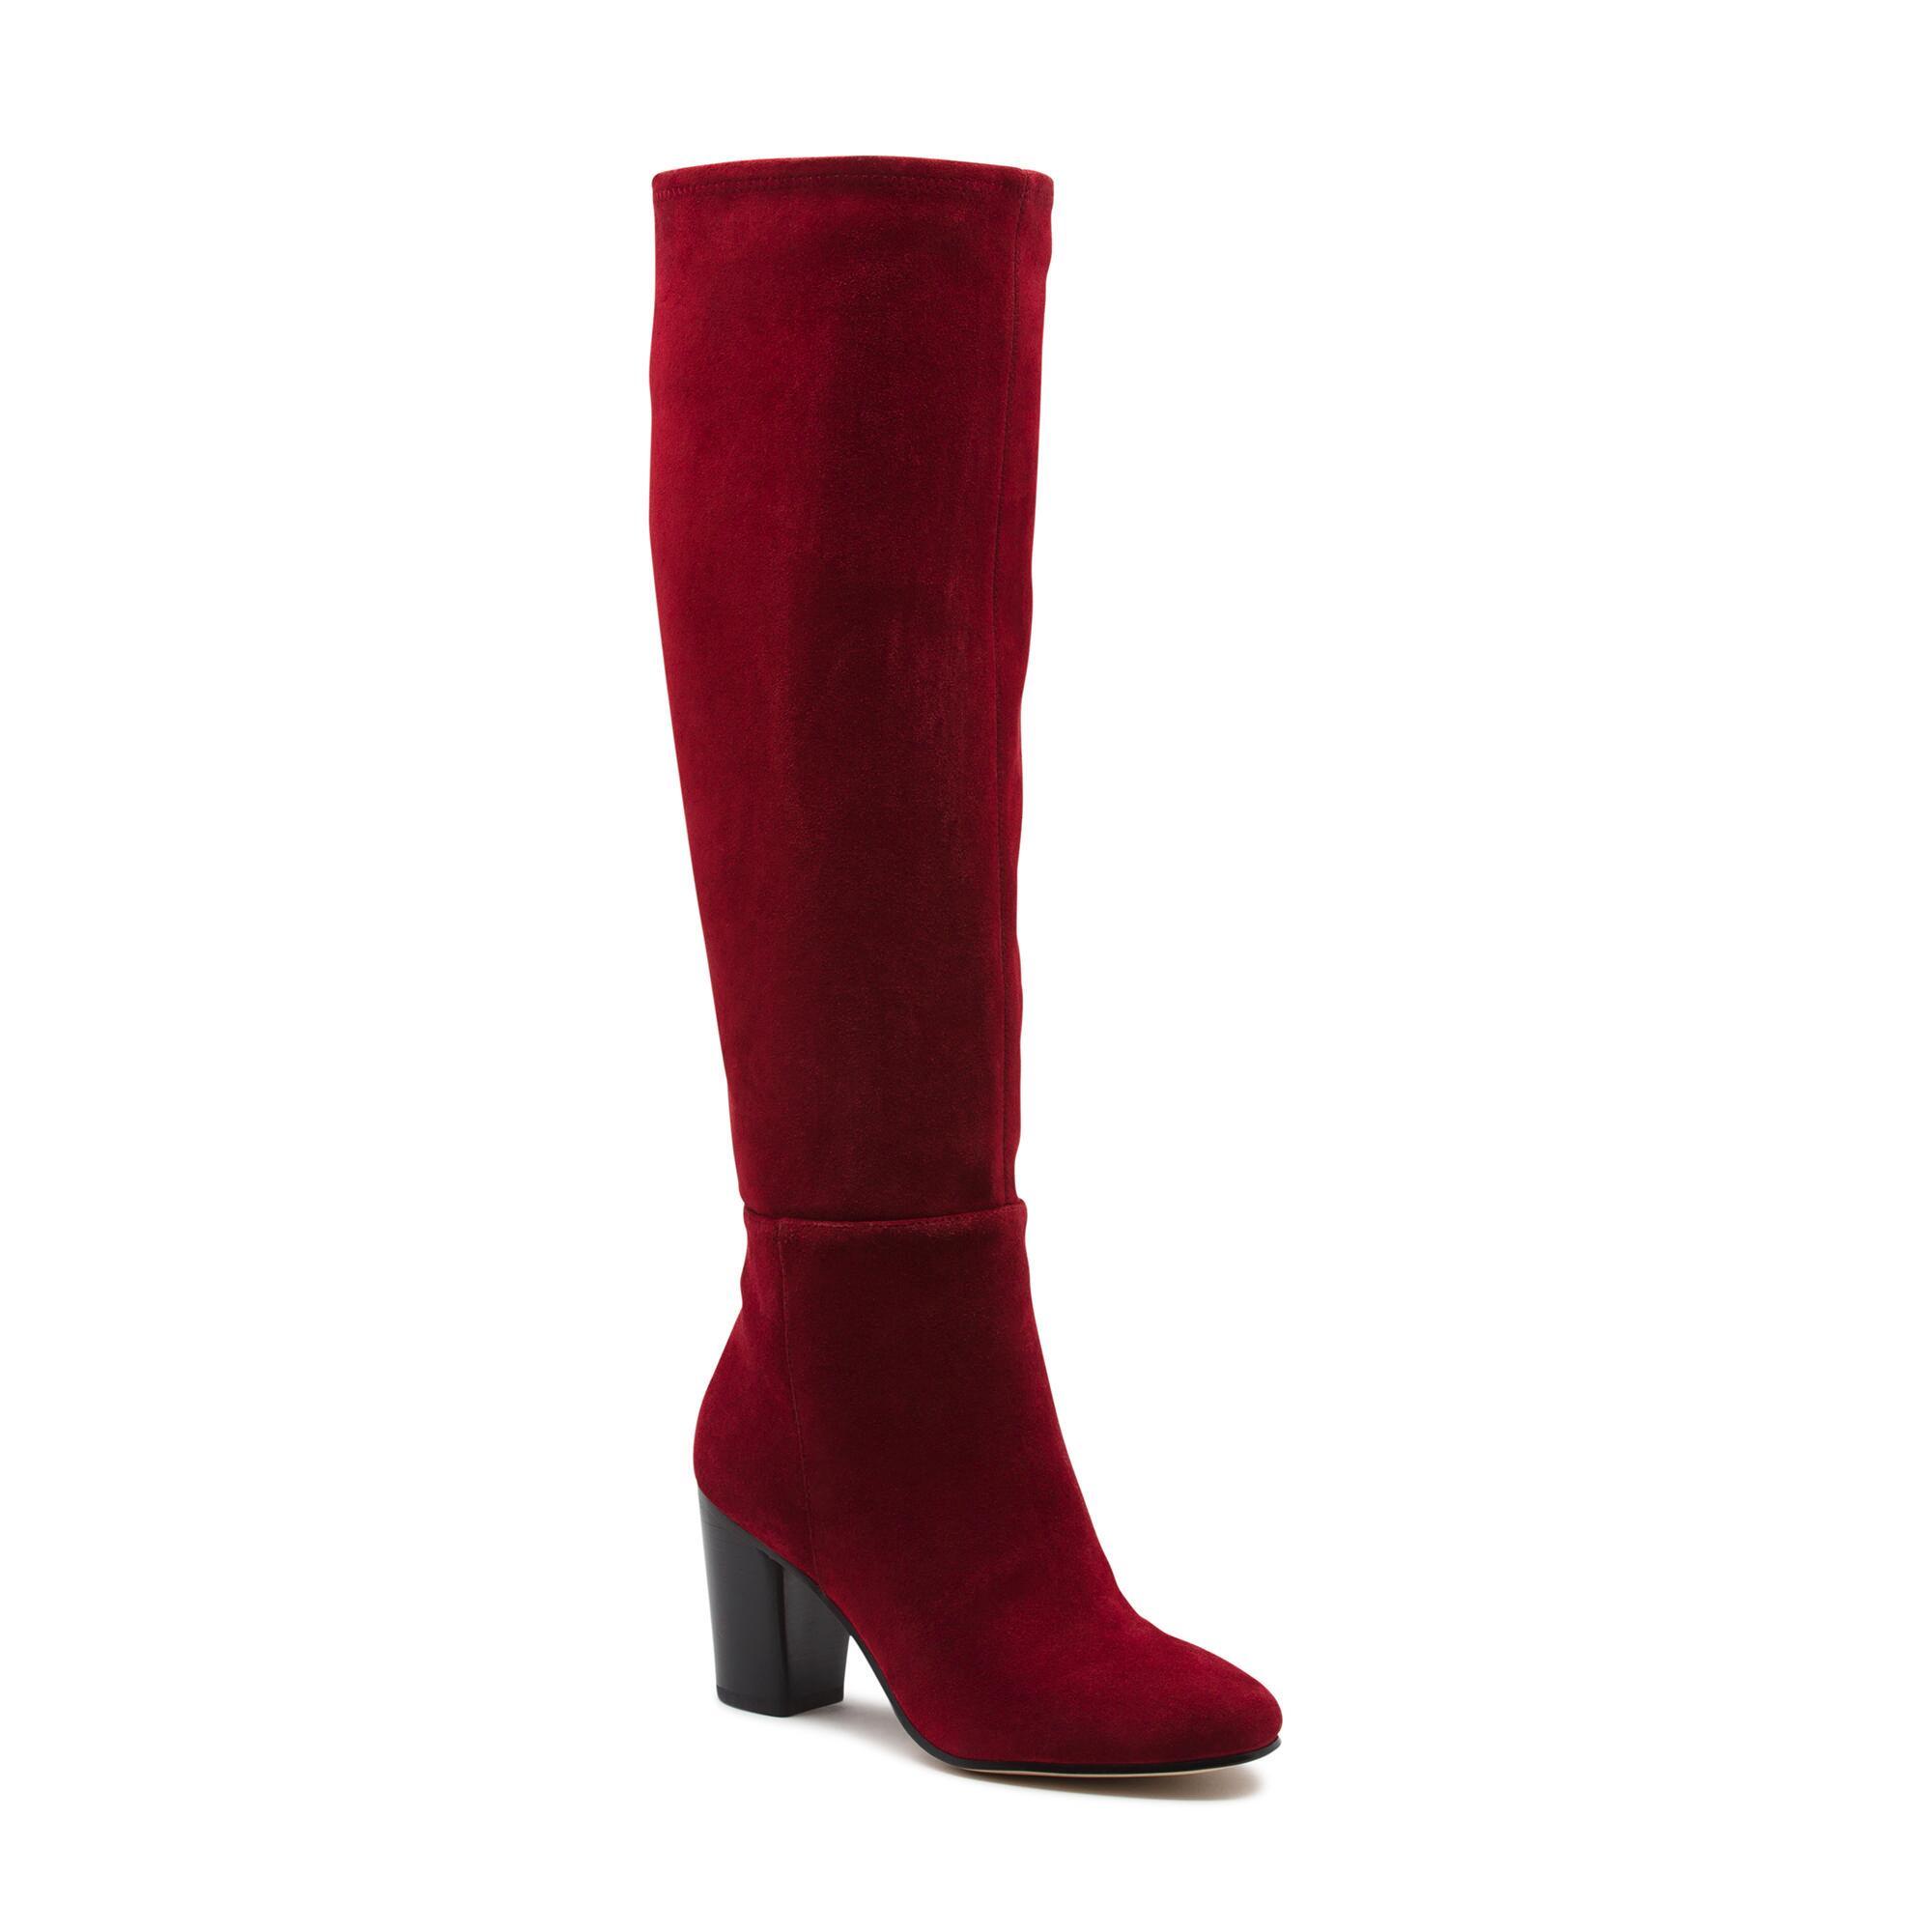 Karl Lagerfeld Tulle Suede Heeled Tall Boots in Brick Red (Red) - Lyst